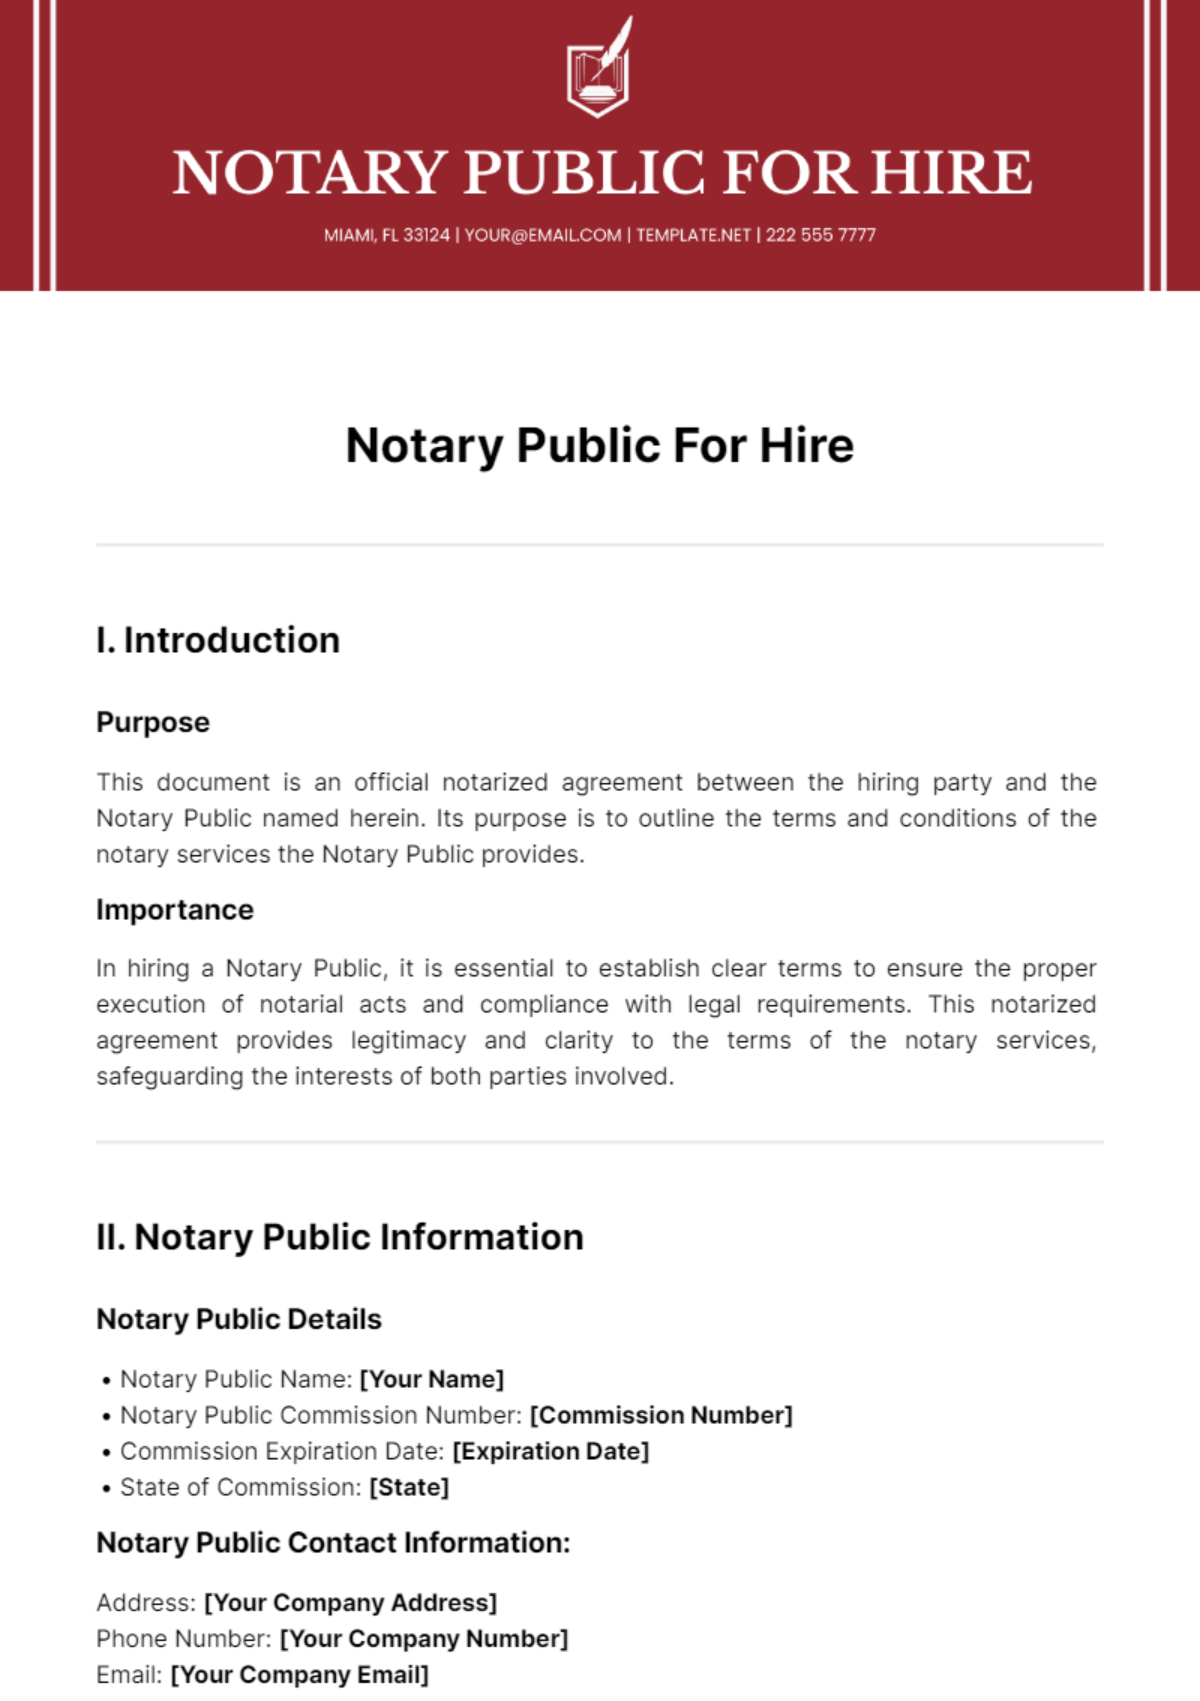 Free Notary Public For Hire Template